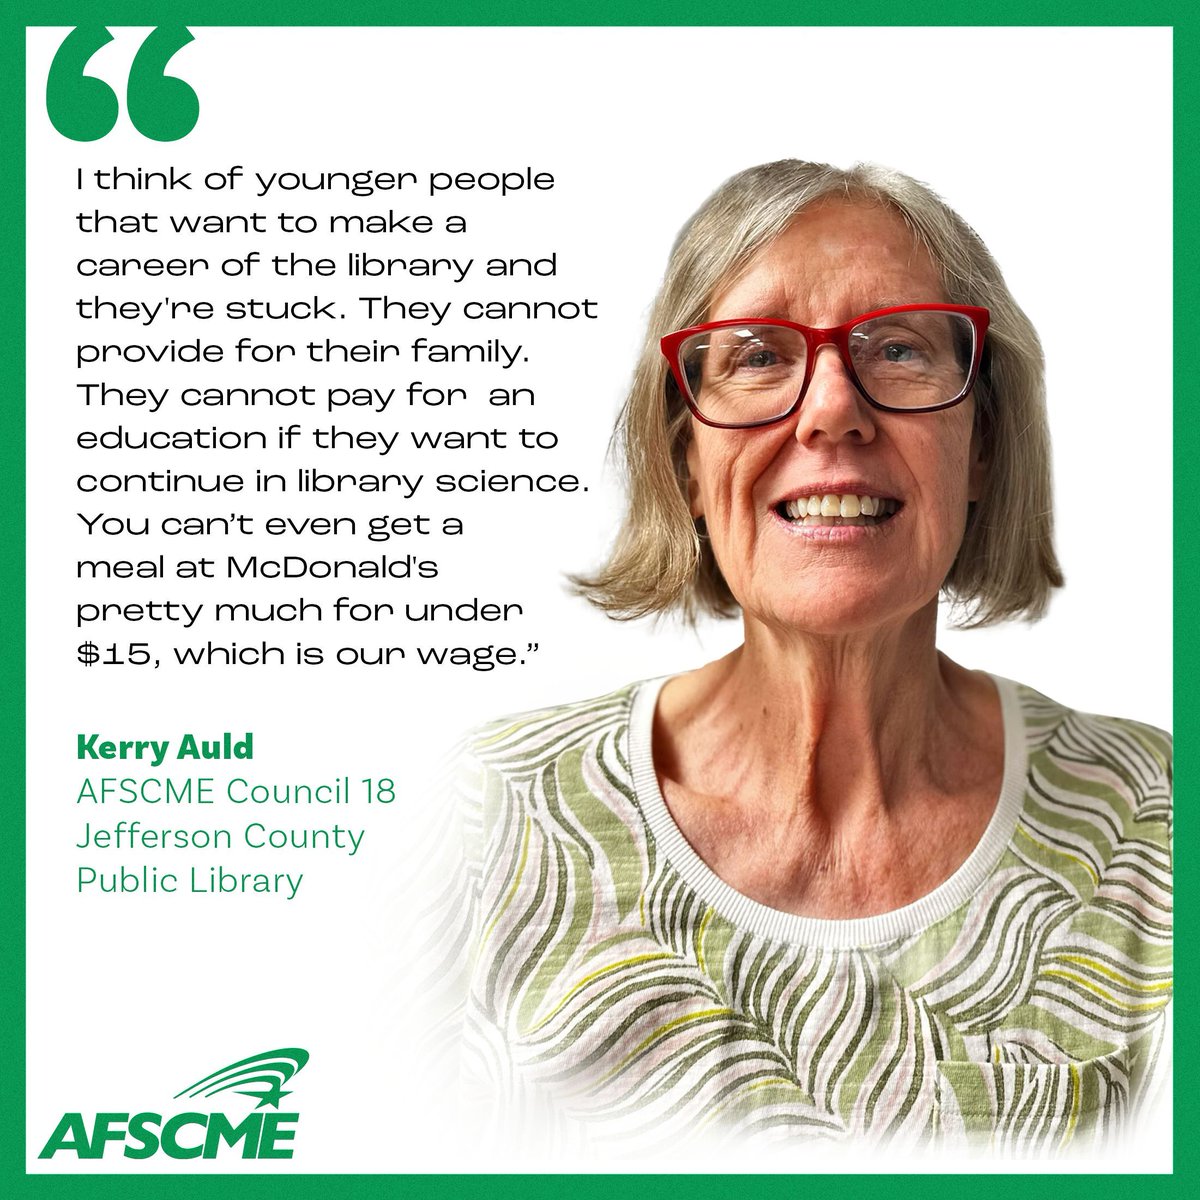 On #NationalLibraryWorkersDay, we speak to Colorado library worker Kerry Auld to find why she joined a union and what being in a union means to workers like her. afsc.me/3QjpKHR